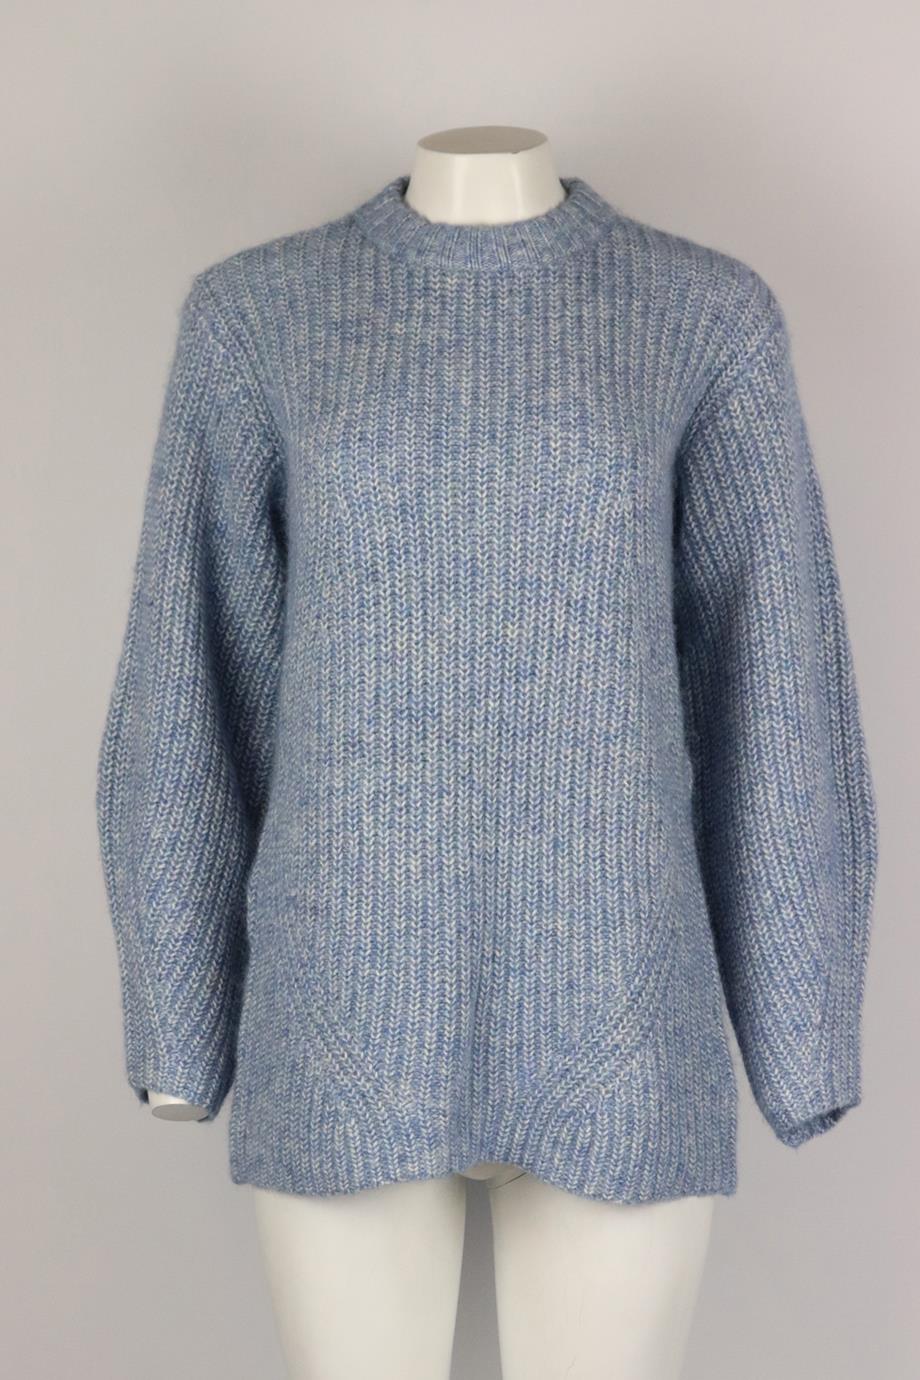 HATCH RIBBED COTTON BLEND SWEATER UK 8